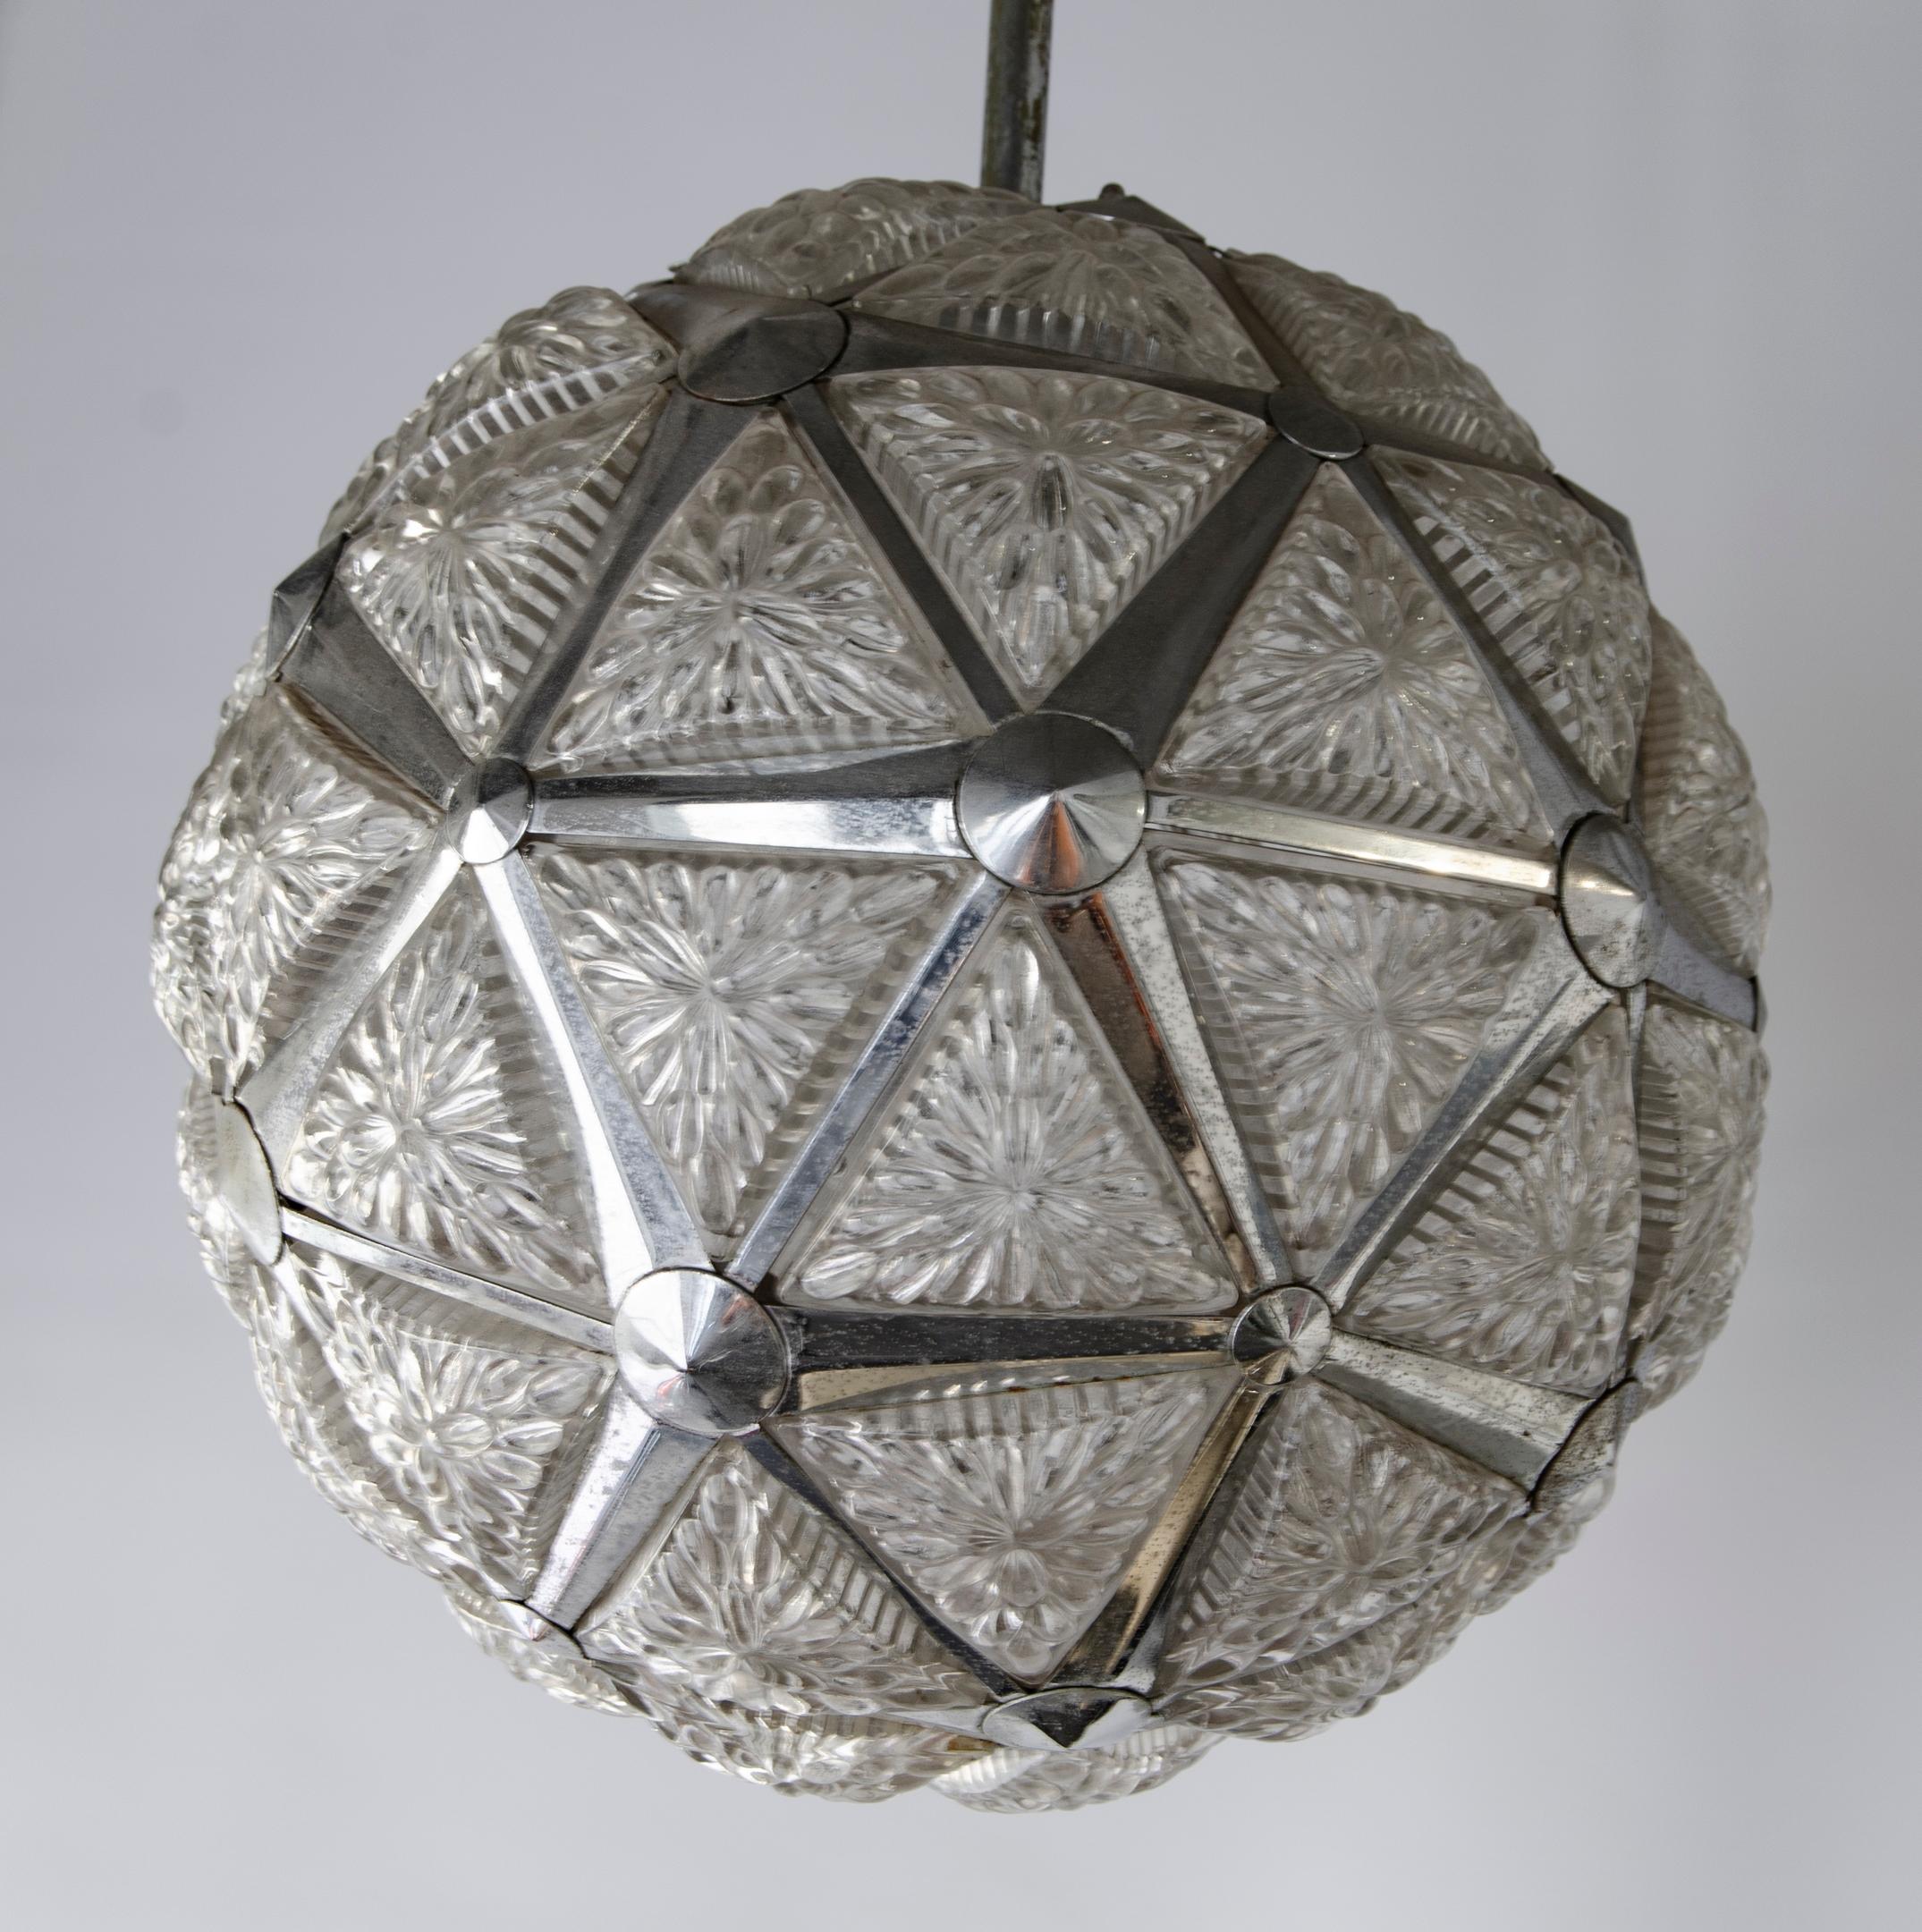 Ceiling lamp from the 60s
Pendant
Metal and glass sphere
Chromed bronze brass
Origin United States Circa 1960
Perfect condition
Natural wear on chrome.